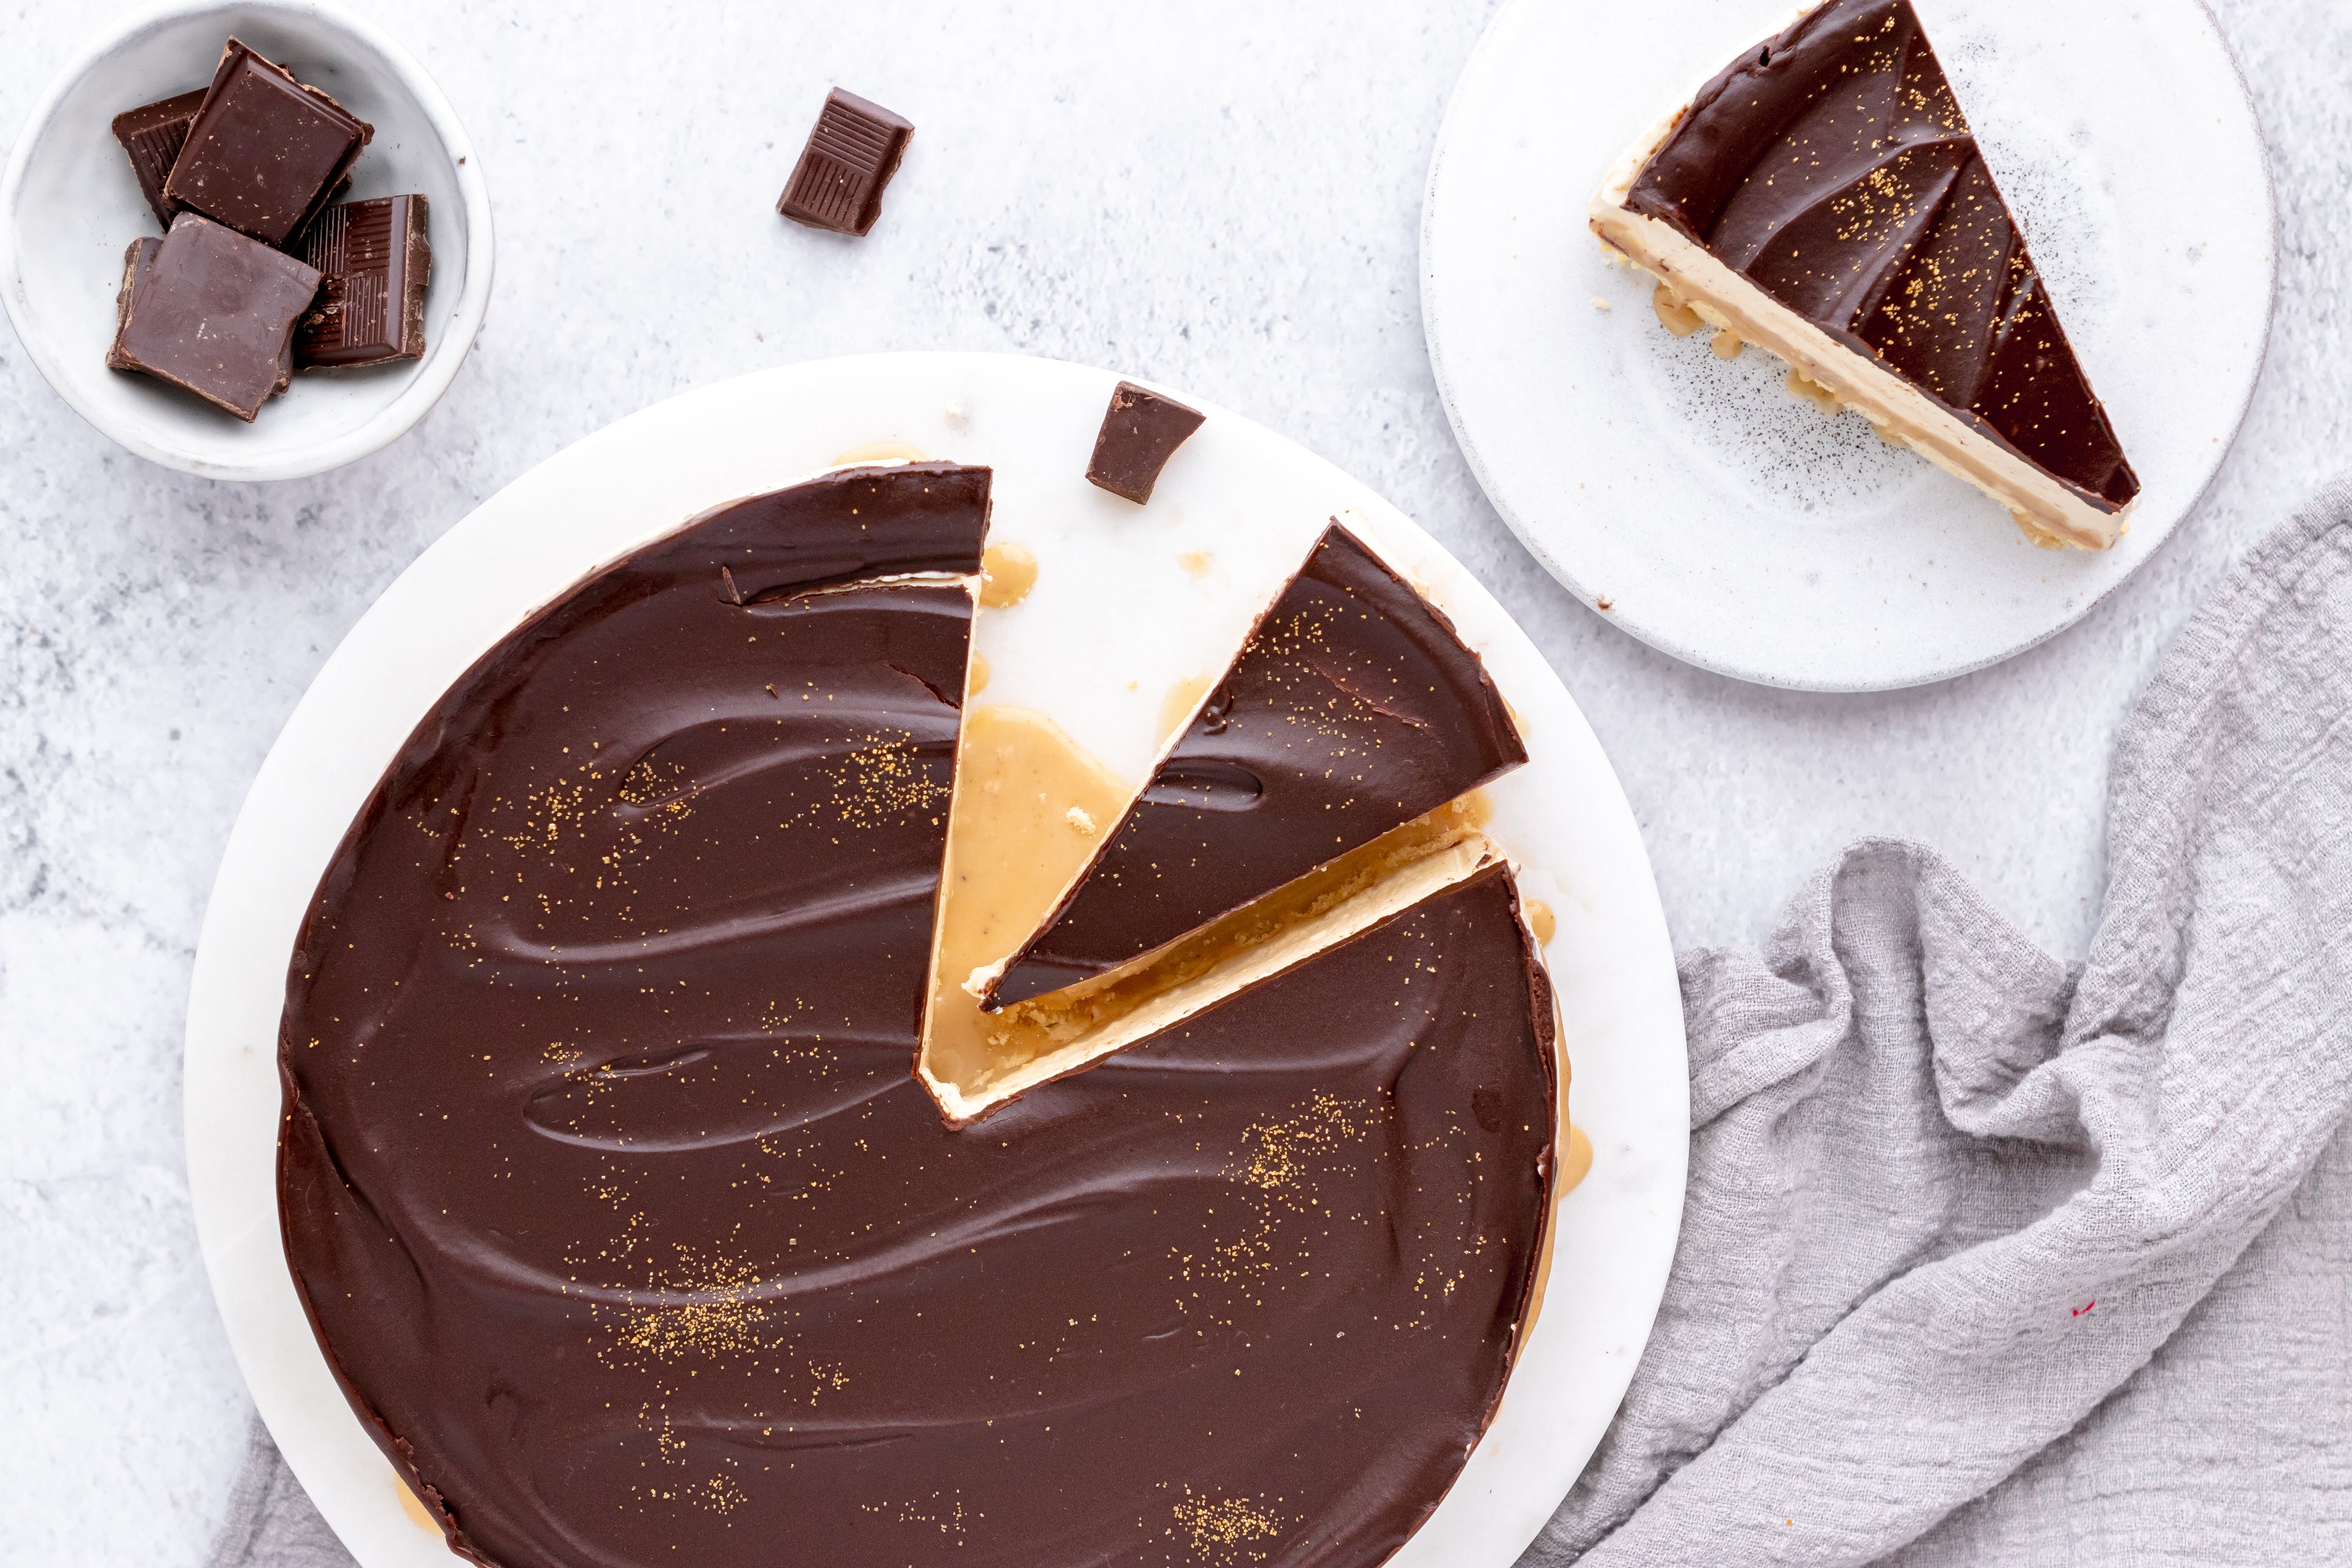 Millionaire's Cheesecake with a slice cut out, next to a small bowl of chocolate pieces